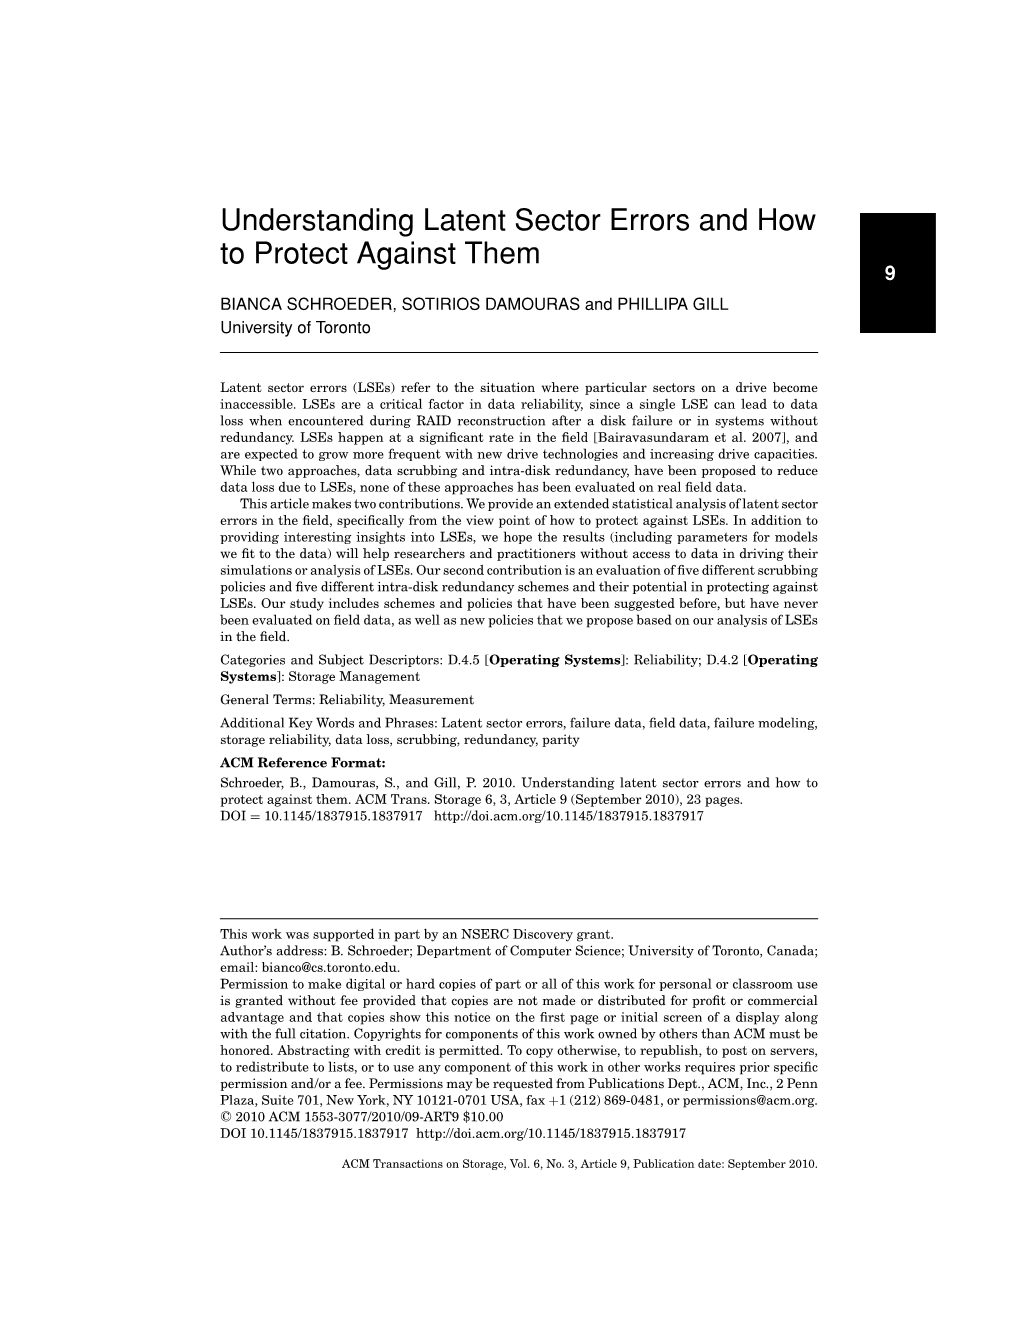 Understanding Latent Sector Errors and How to Protect Against Them 9 BIANCA SCHROEDER, SOTIRIOS DAMOURAS and PHILLIPA GILL University of Toronto